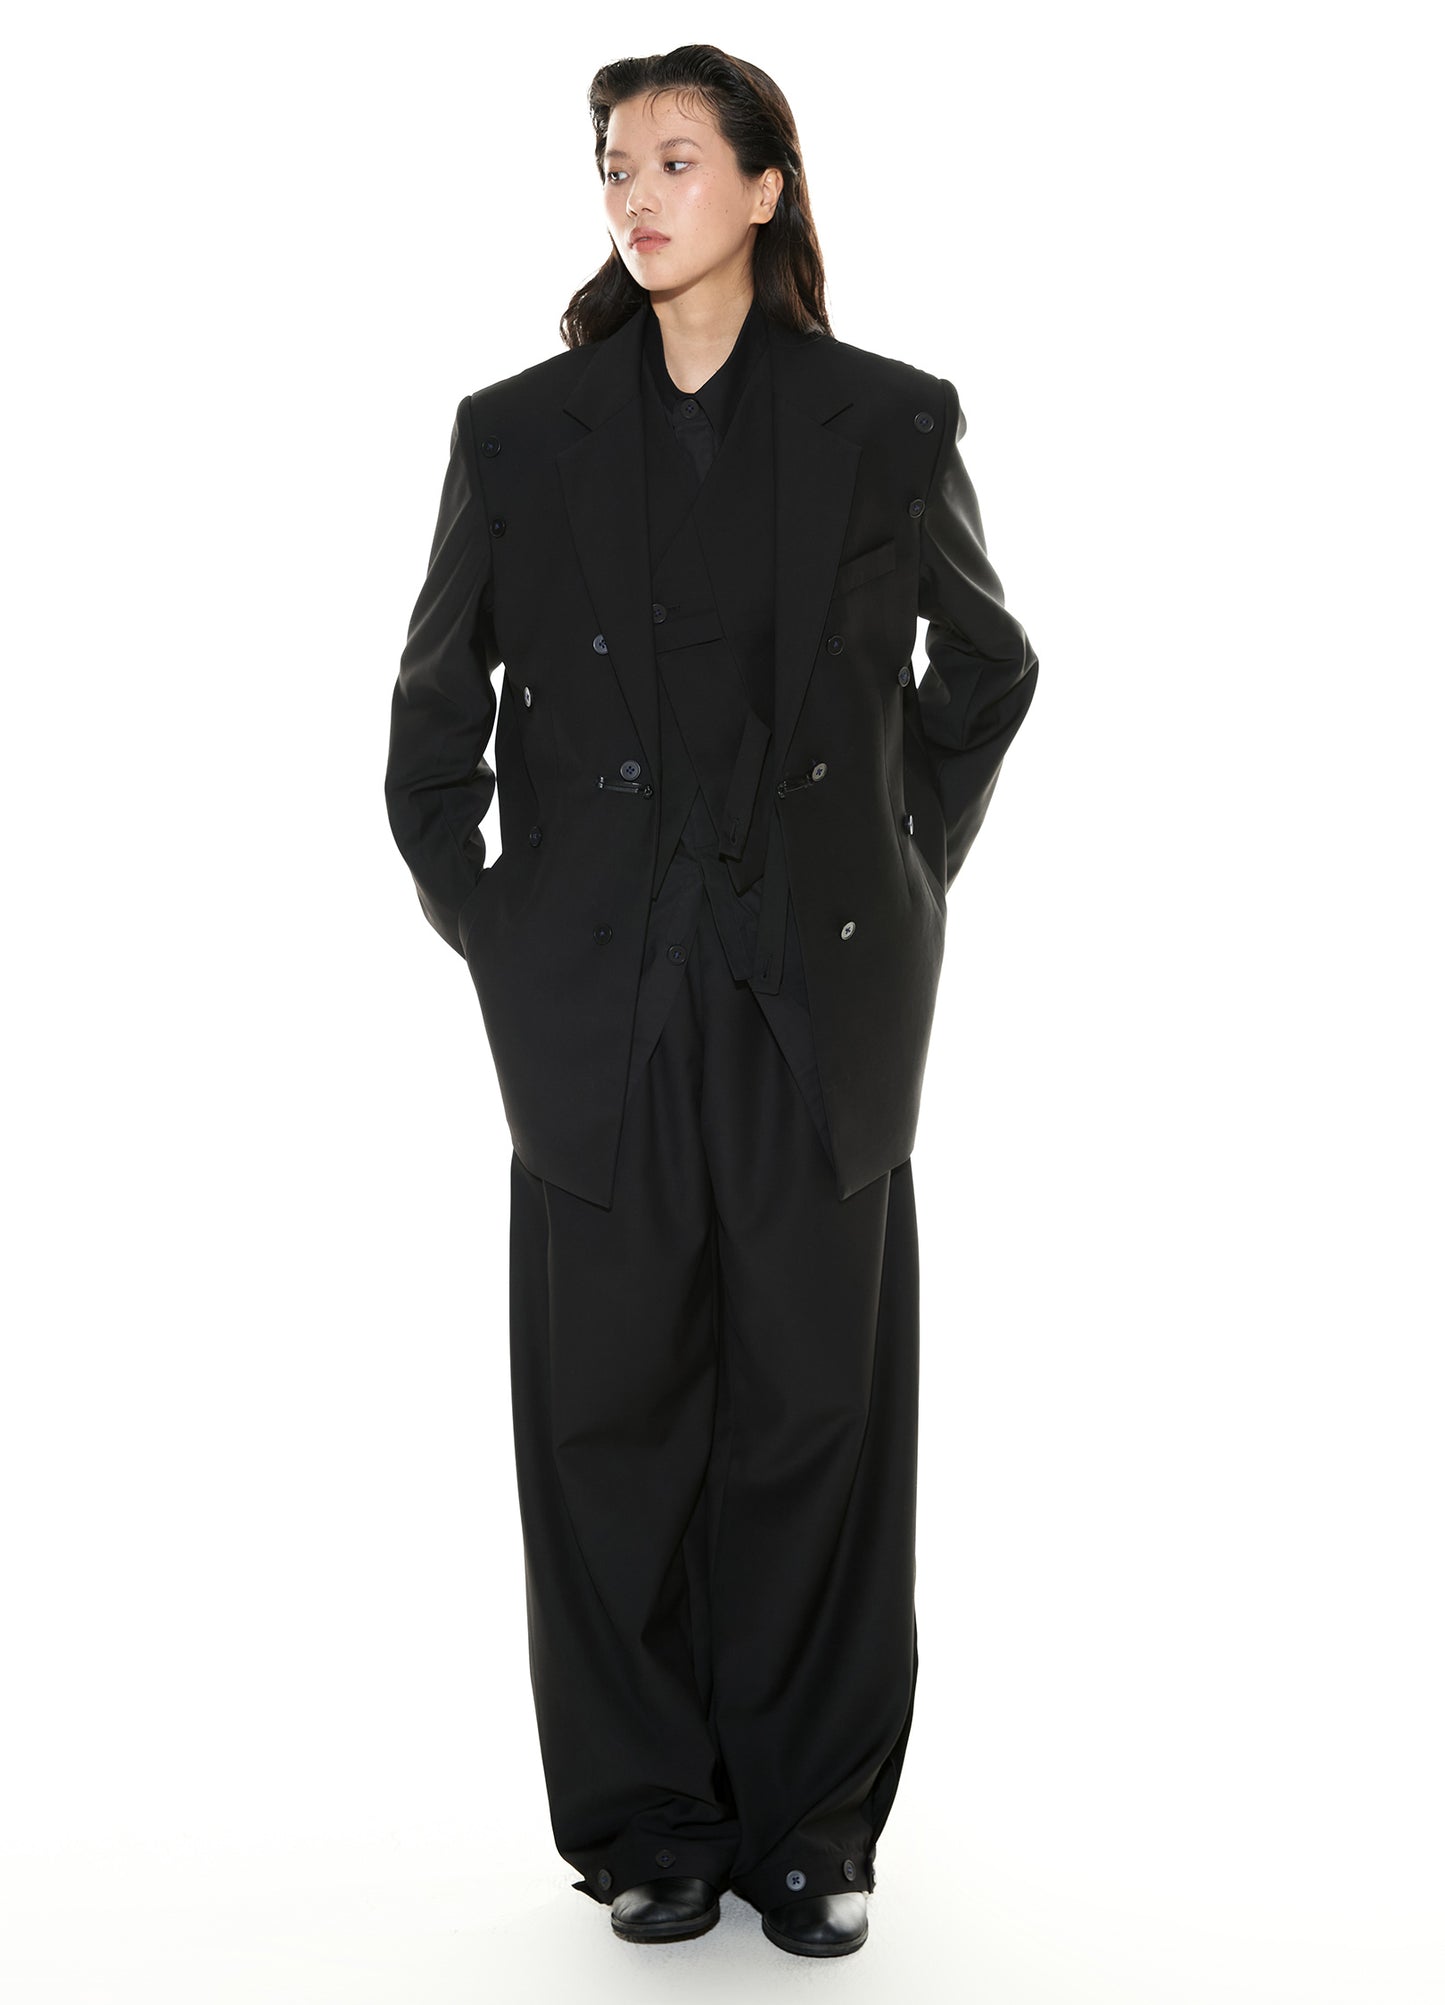 Wide Buckle Suit Trousers